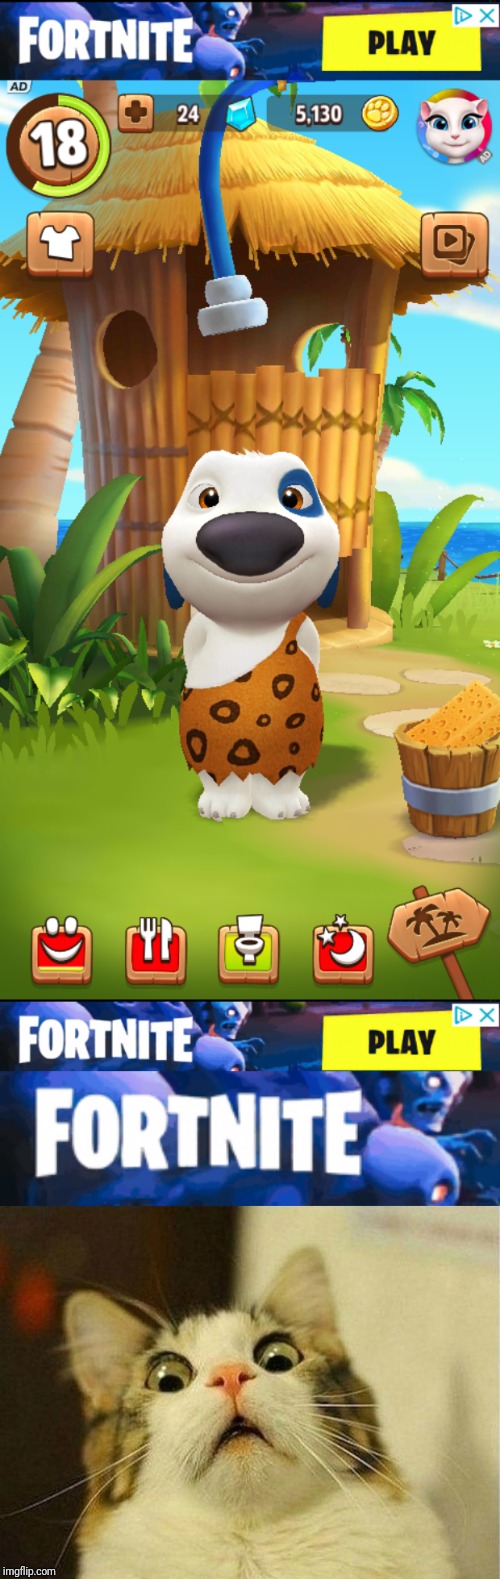 When you see Fortnite ad in a game for kids | image tagged in memes,scared cat,funny,fortnite,cat,dog | made w/ Imgflip meme maker